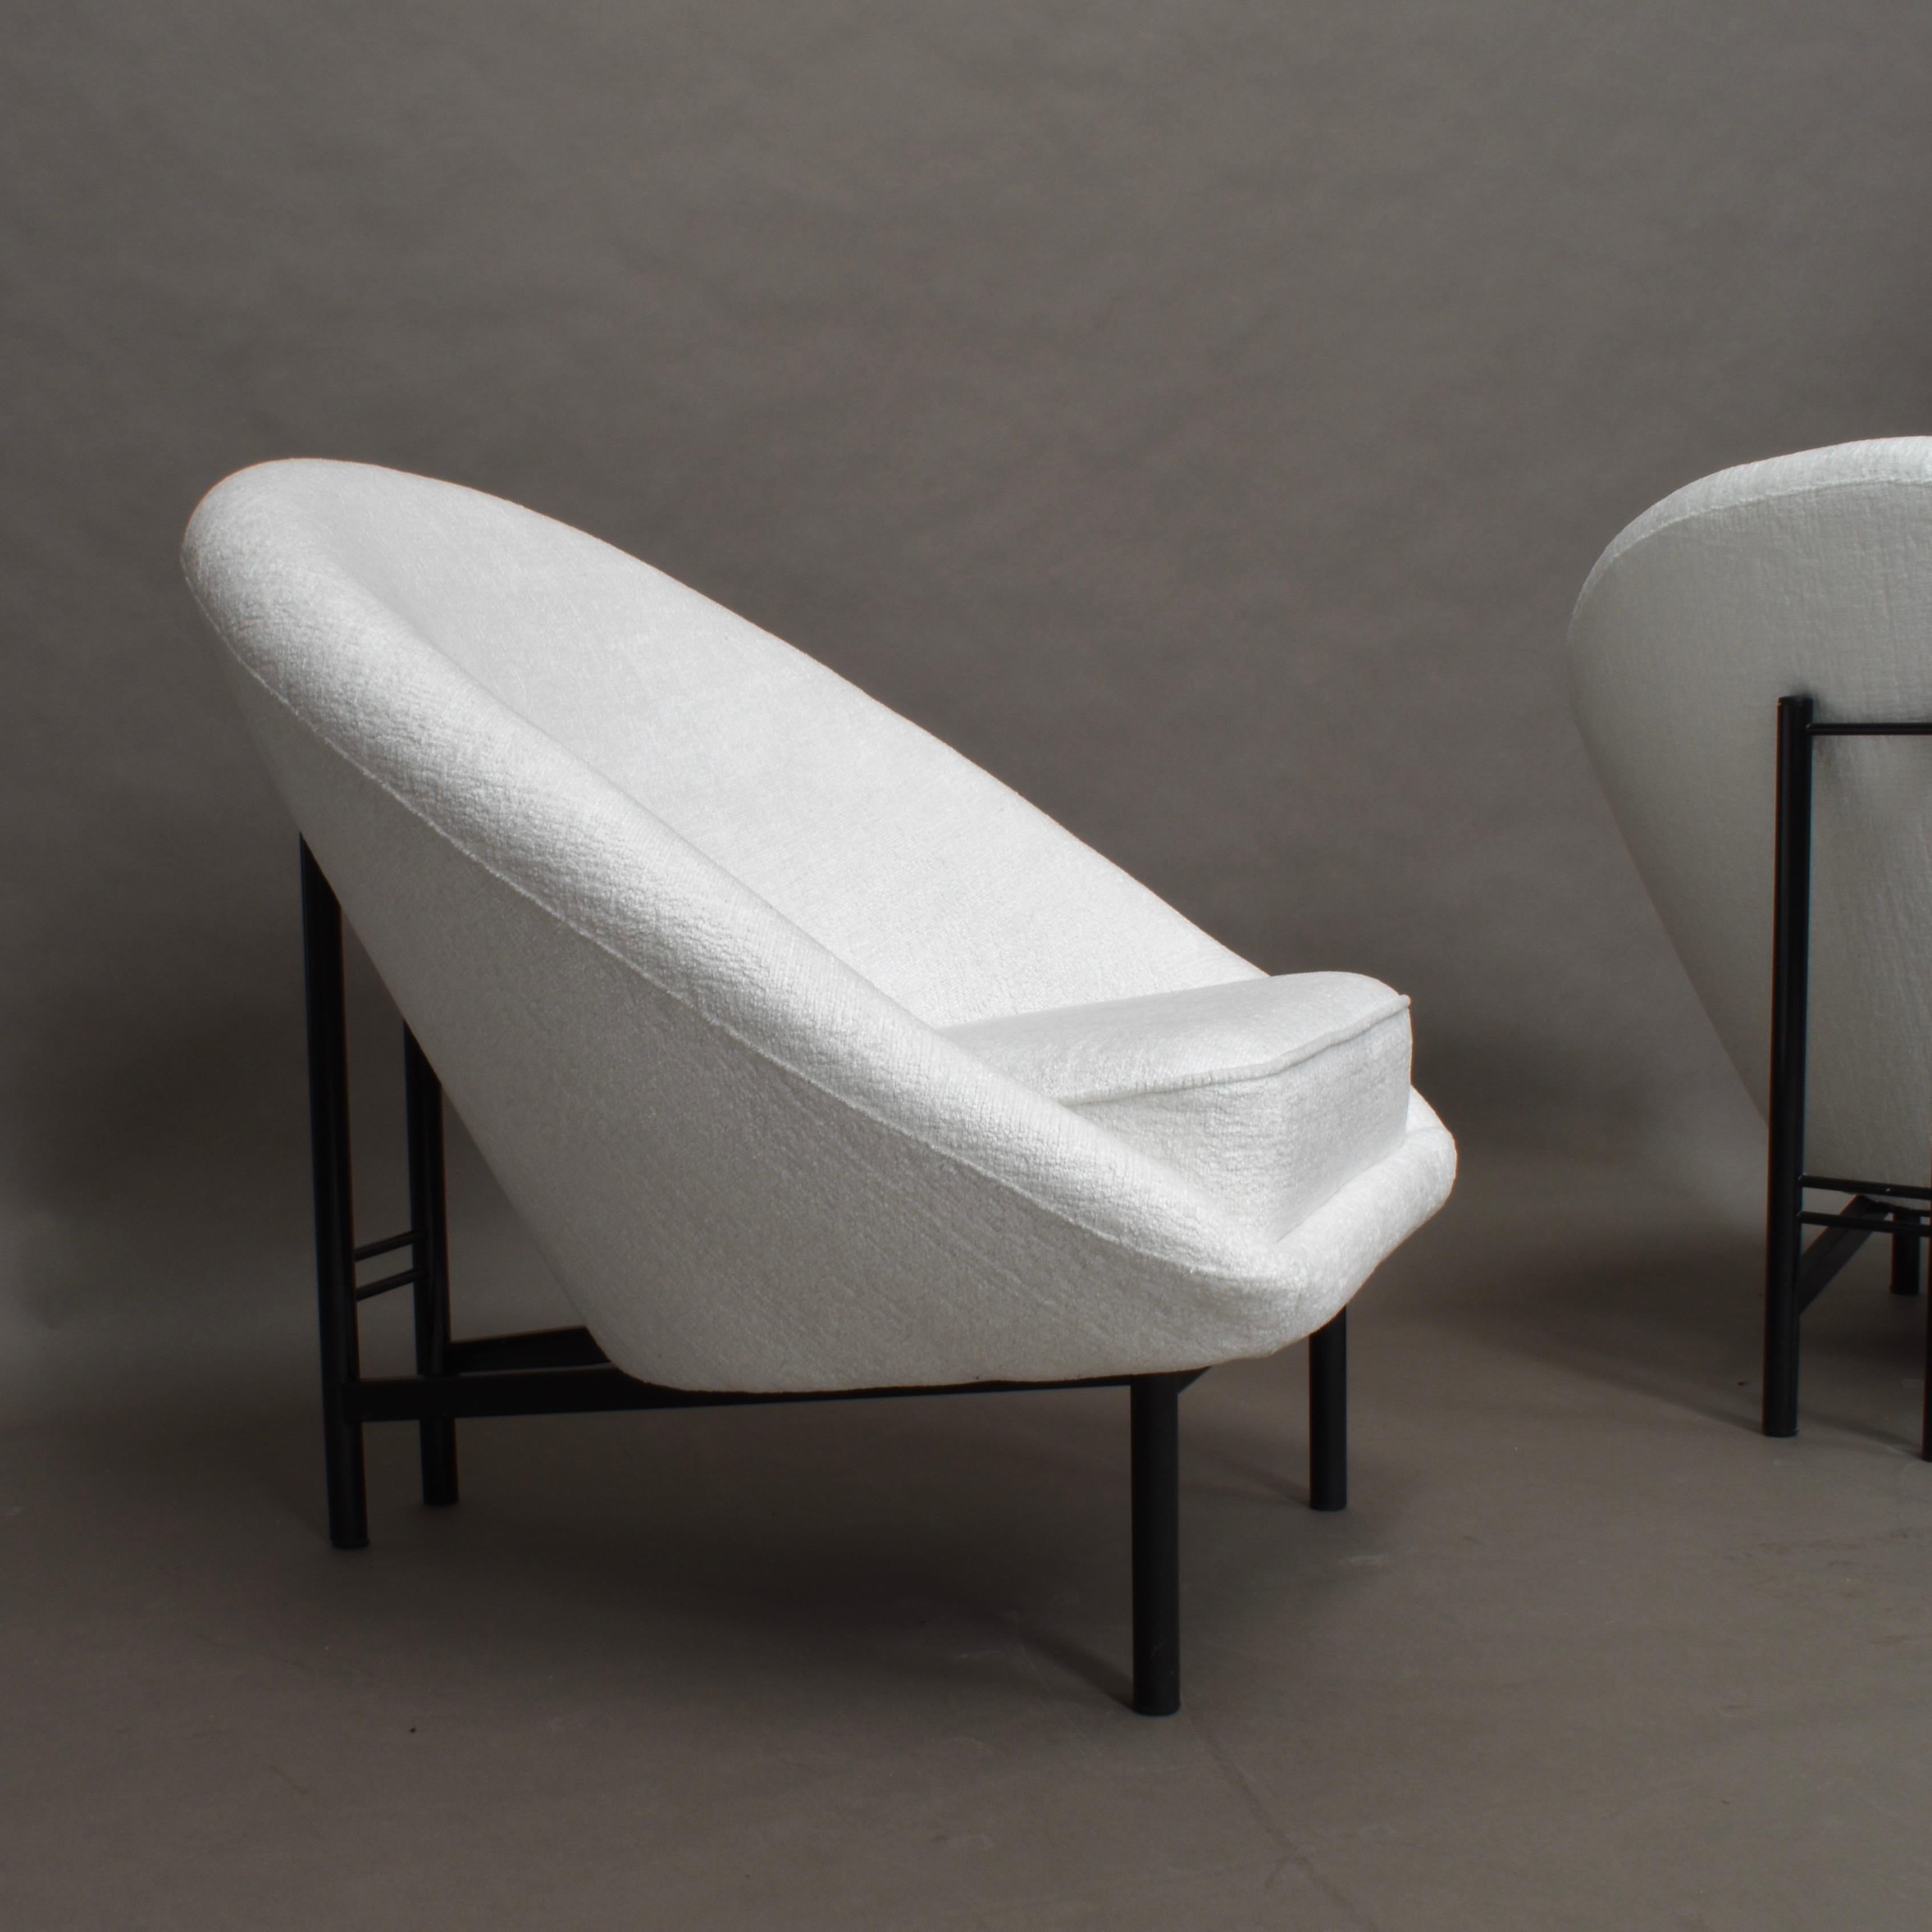 Very rare Theo Ruth armchair model F815 for Artifort, Netherlands, 1958. The listing and price are for one chair.
This is a very rare and sophisticated center-piece.

The chair has been reupholstered in a high quality white fabric by Keymer